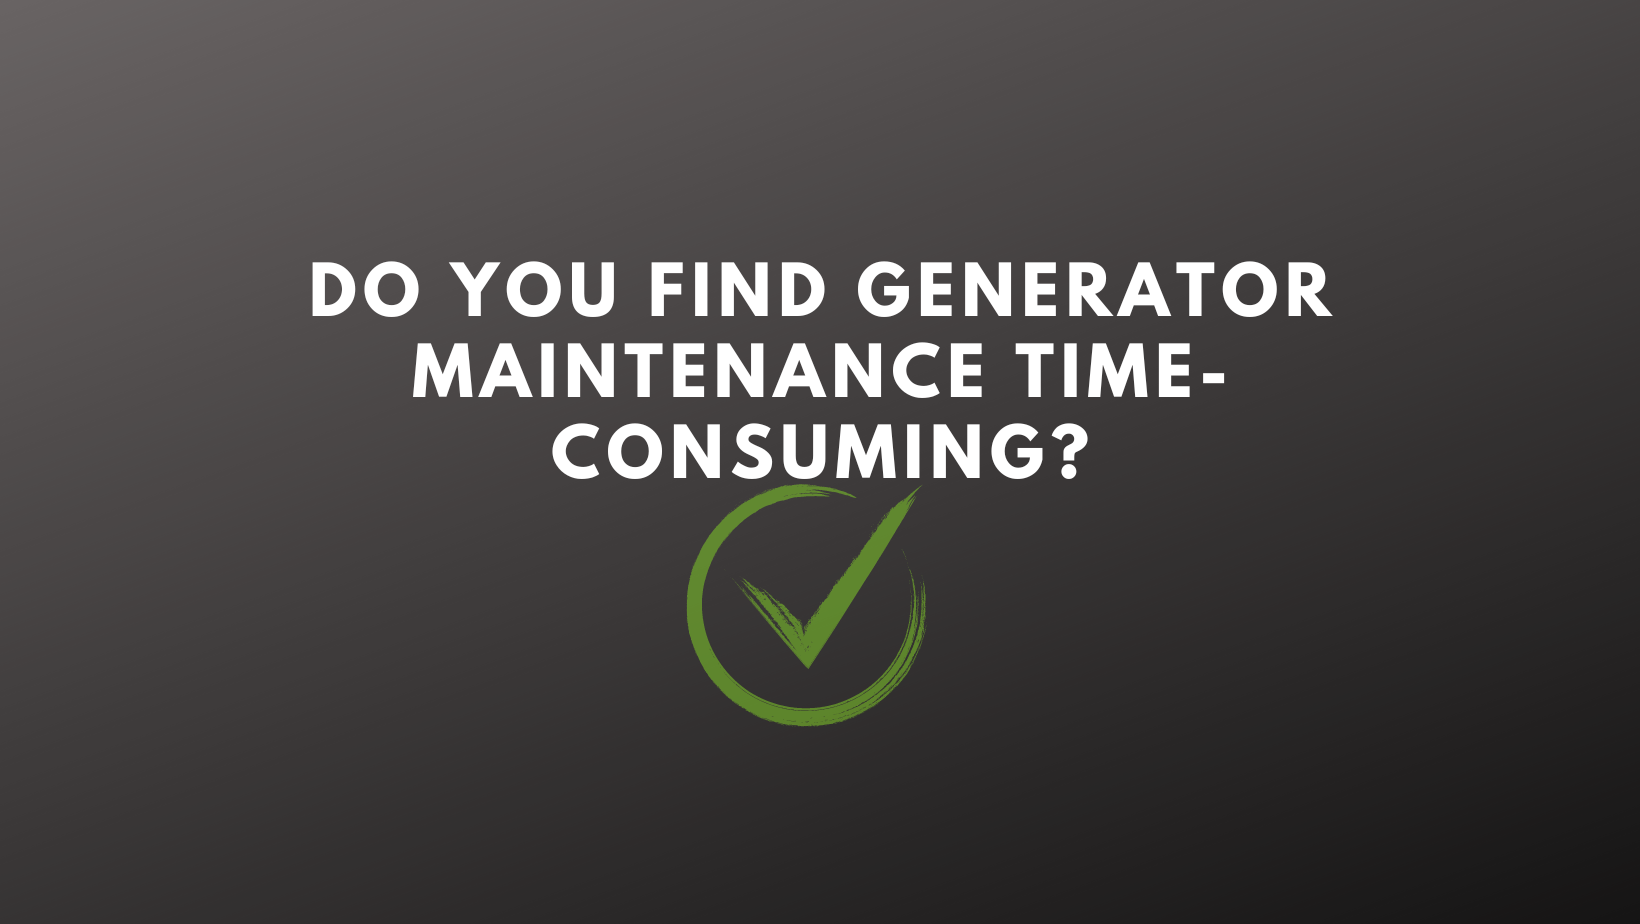 Do you find generator maintenance time-consuming?